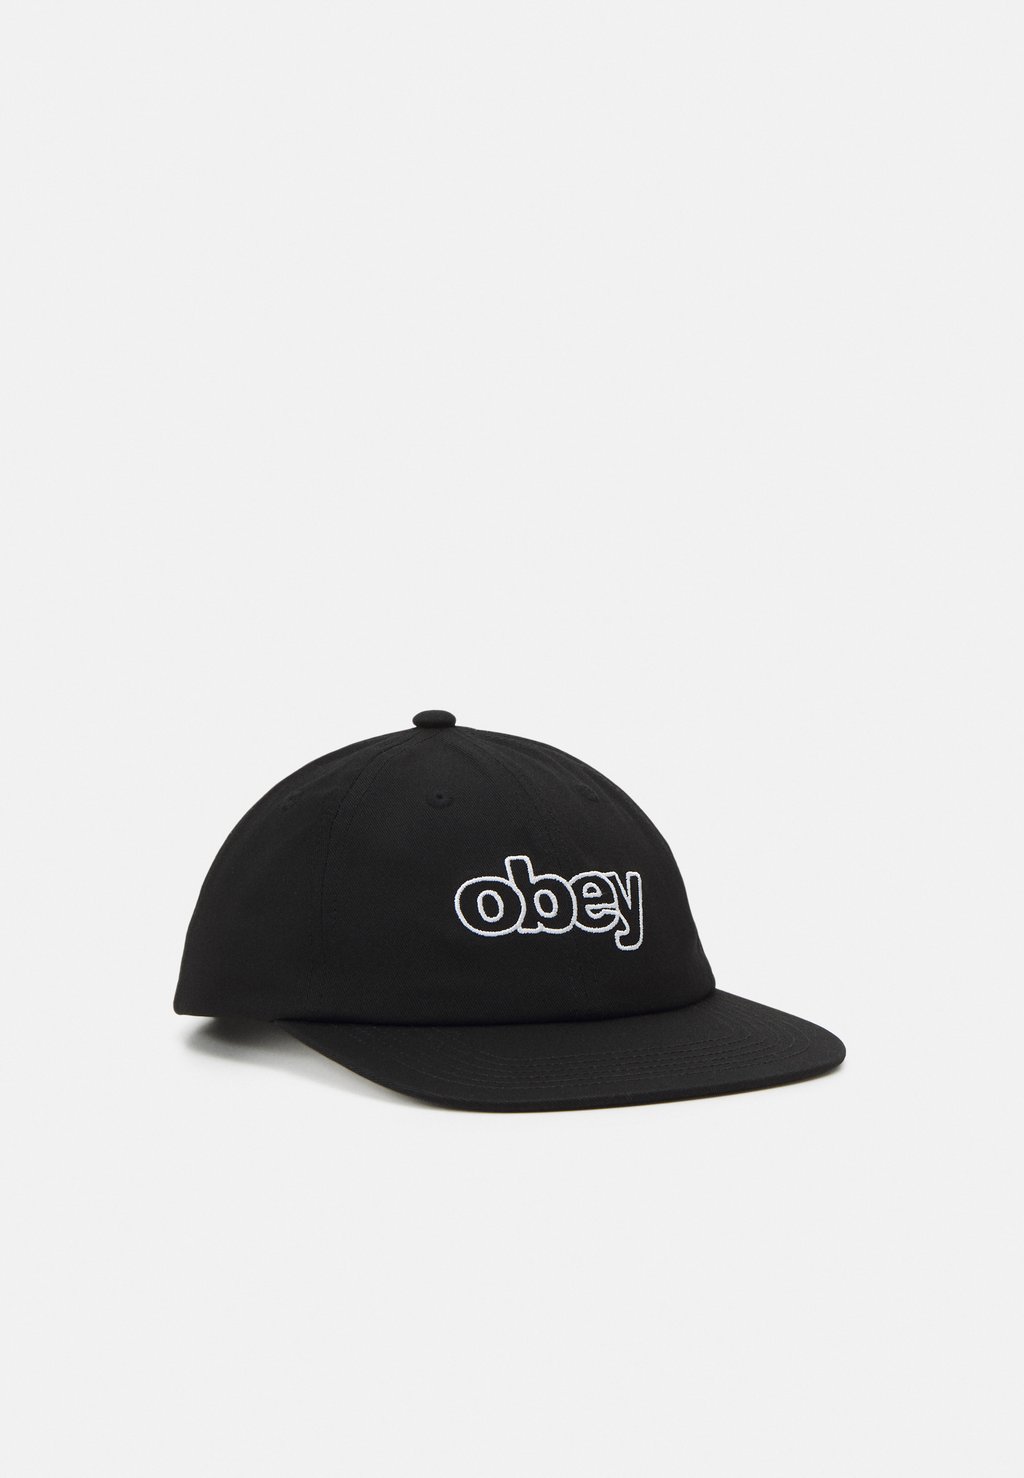 Кепка Obey Clothing OBEY SELECT 6 PANEL SNAPBACK, черный кепка wizard panel snapback unisex obey clothing черный